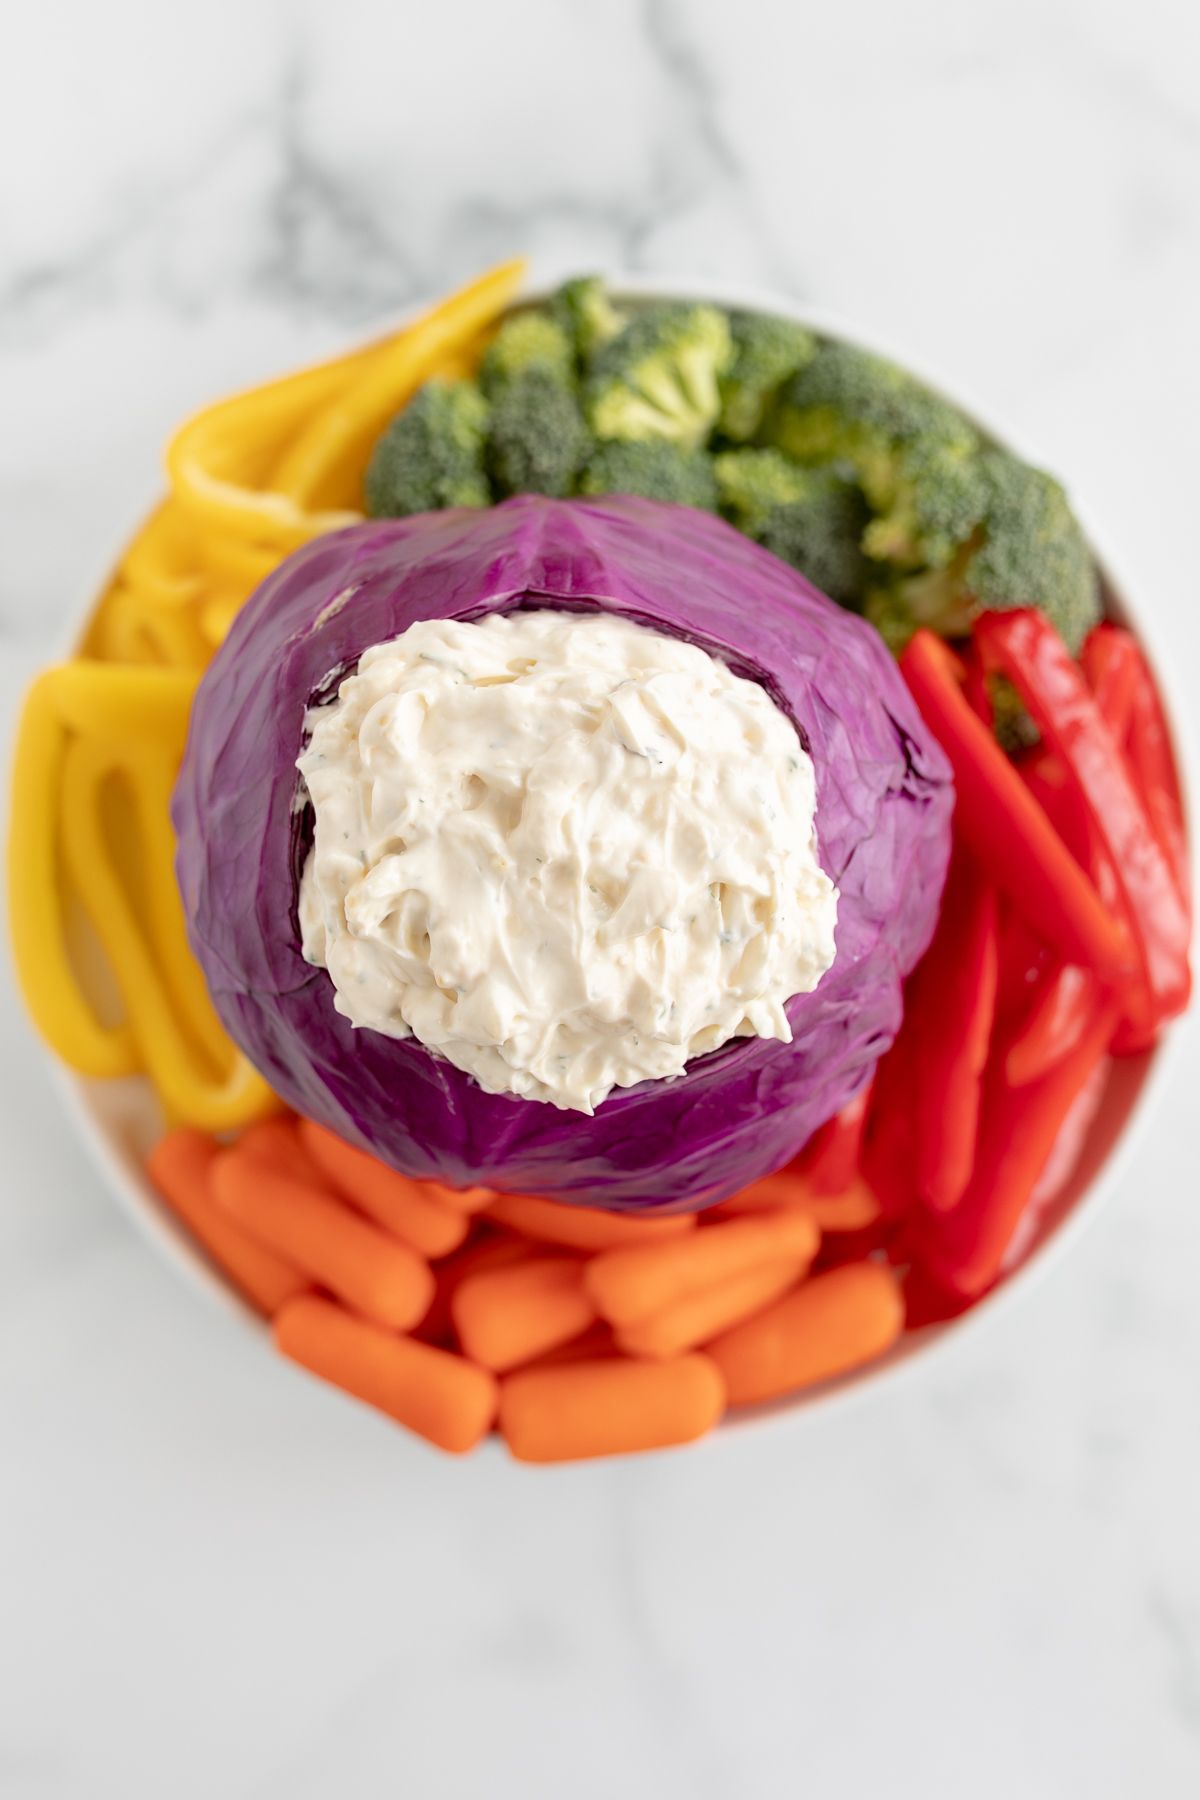 Veggie dip inside a bowl made of purple cabbage